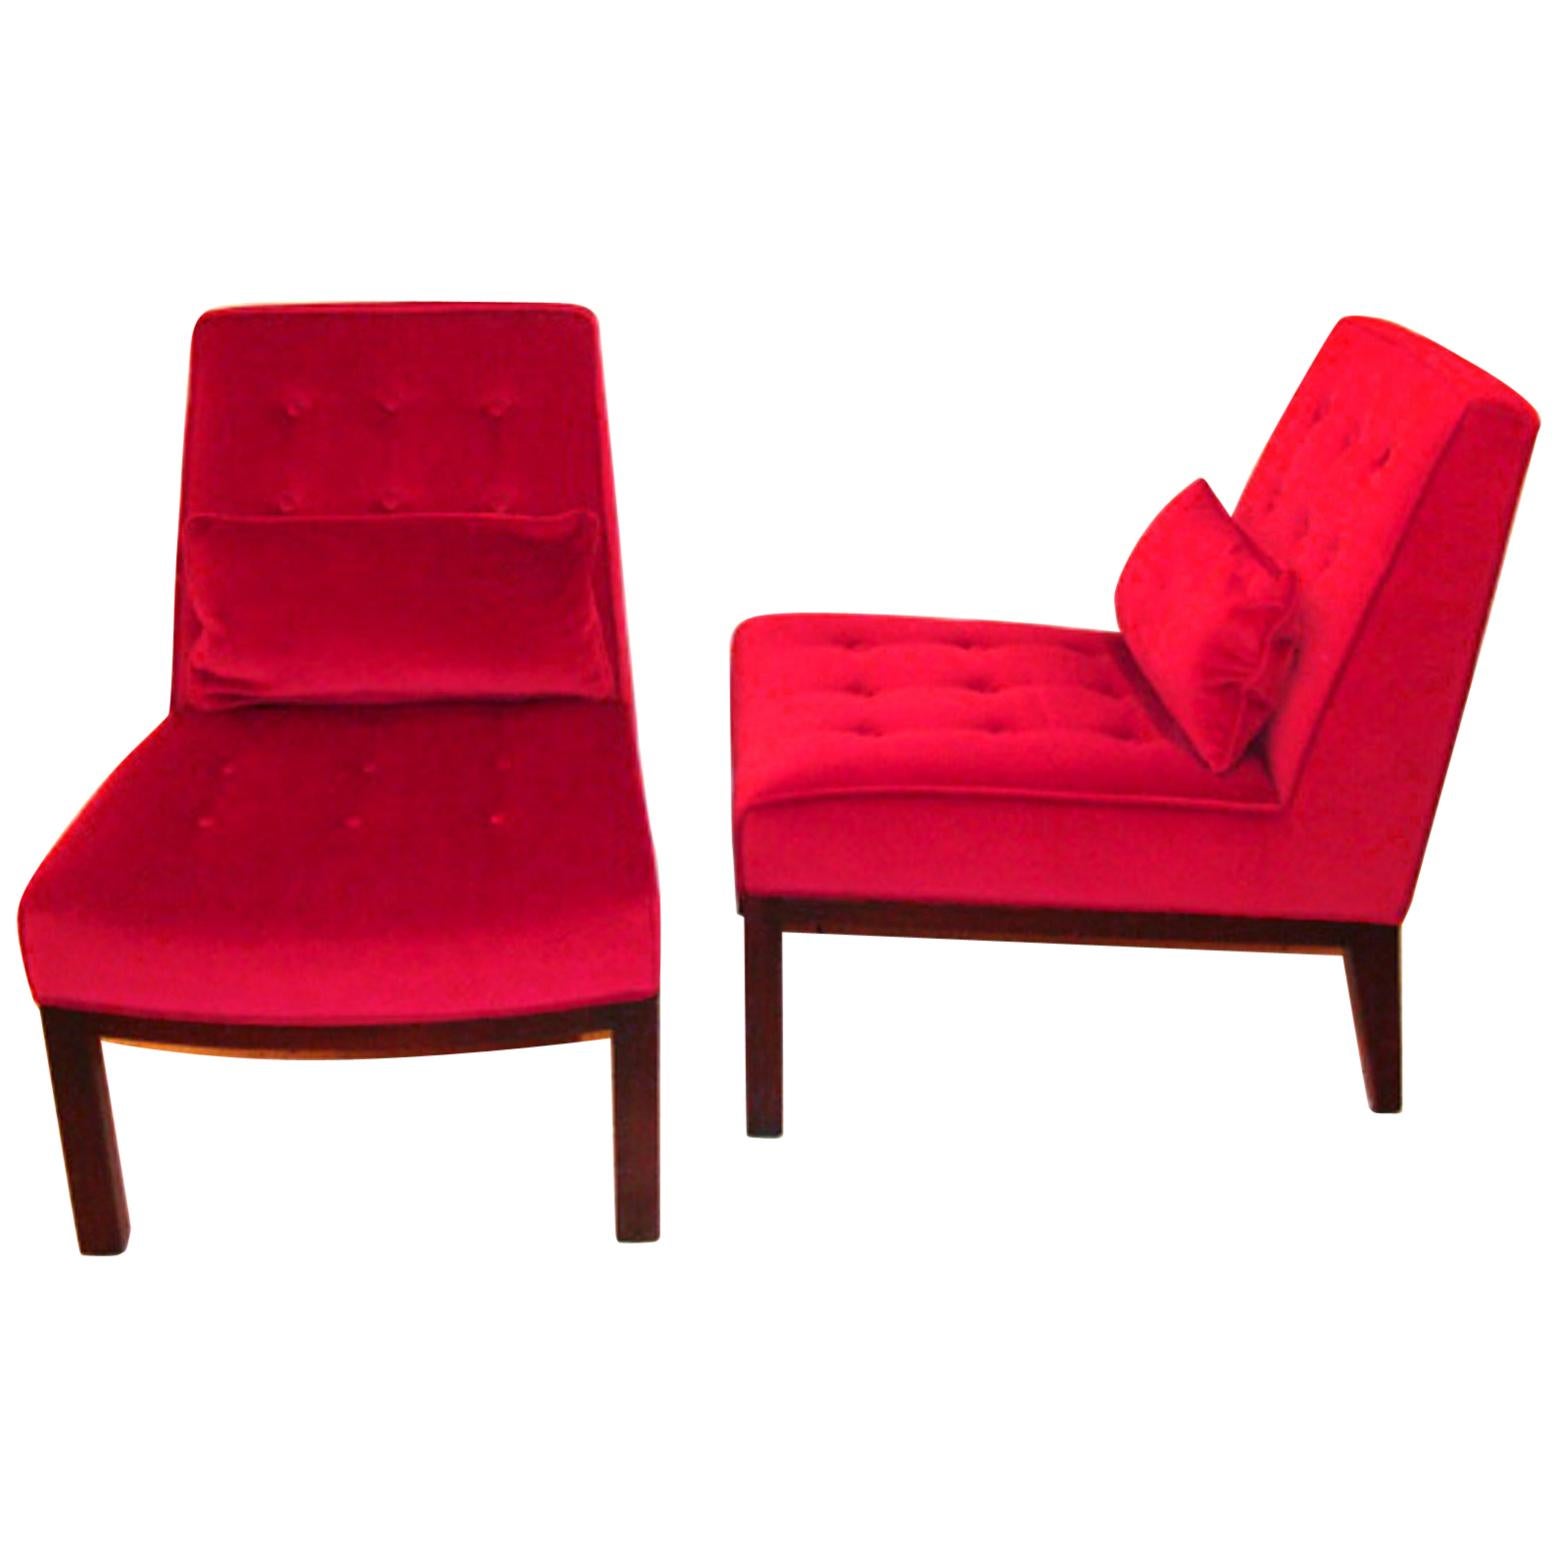 Pair of Edward Wormley/ Dunbar Lounge Chairs For Sale